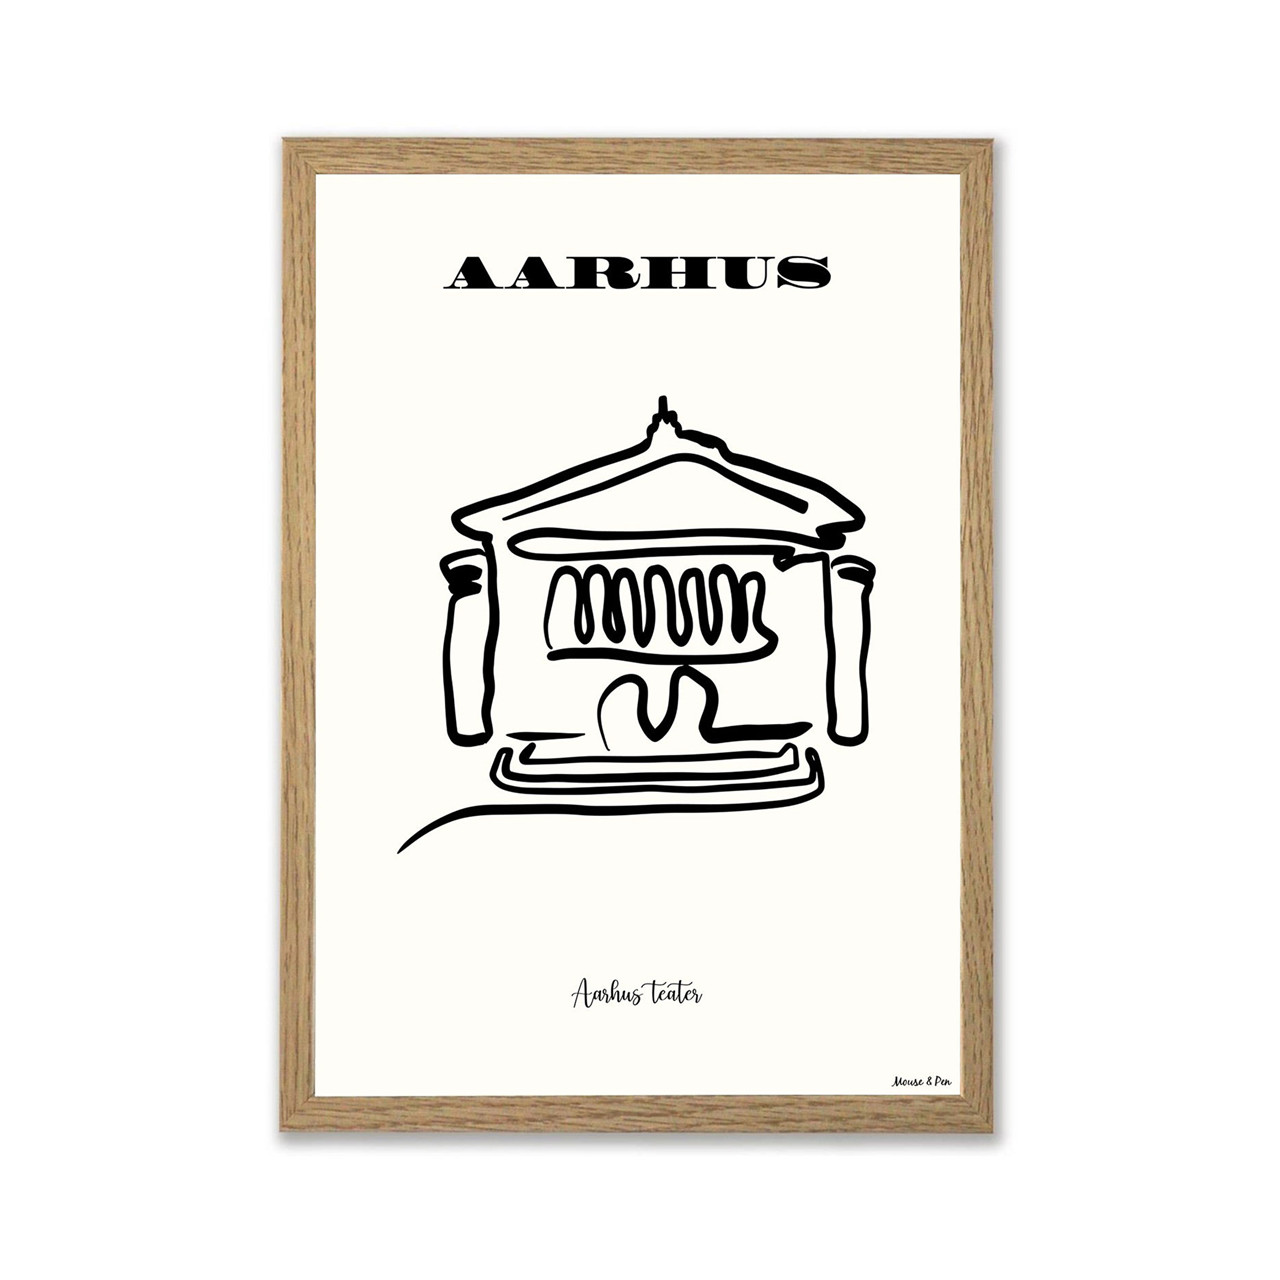 Mouse and Pen Illustration MOUSE AND PEN “Aarhus teater” Plakat A3